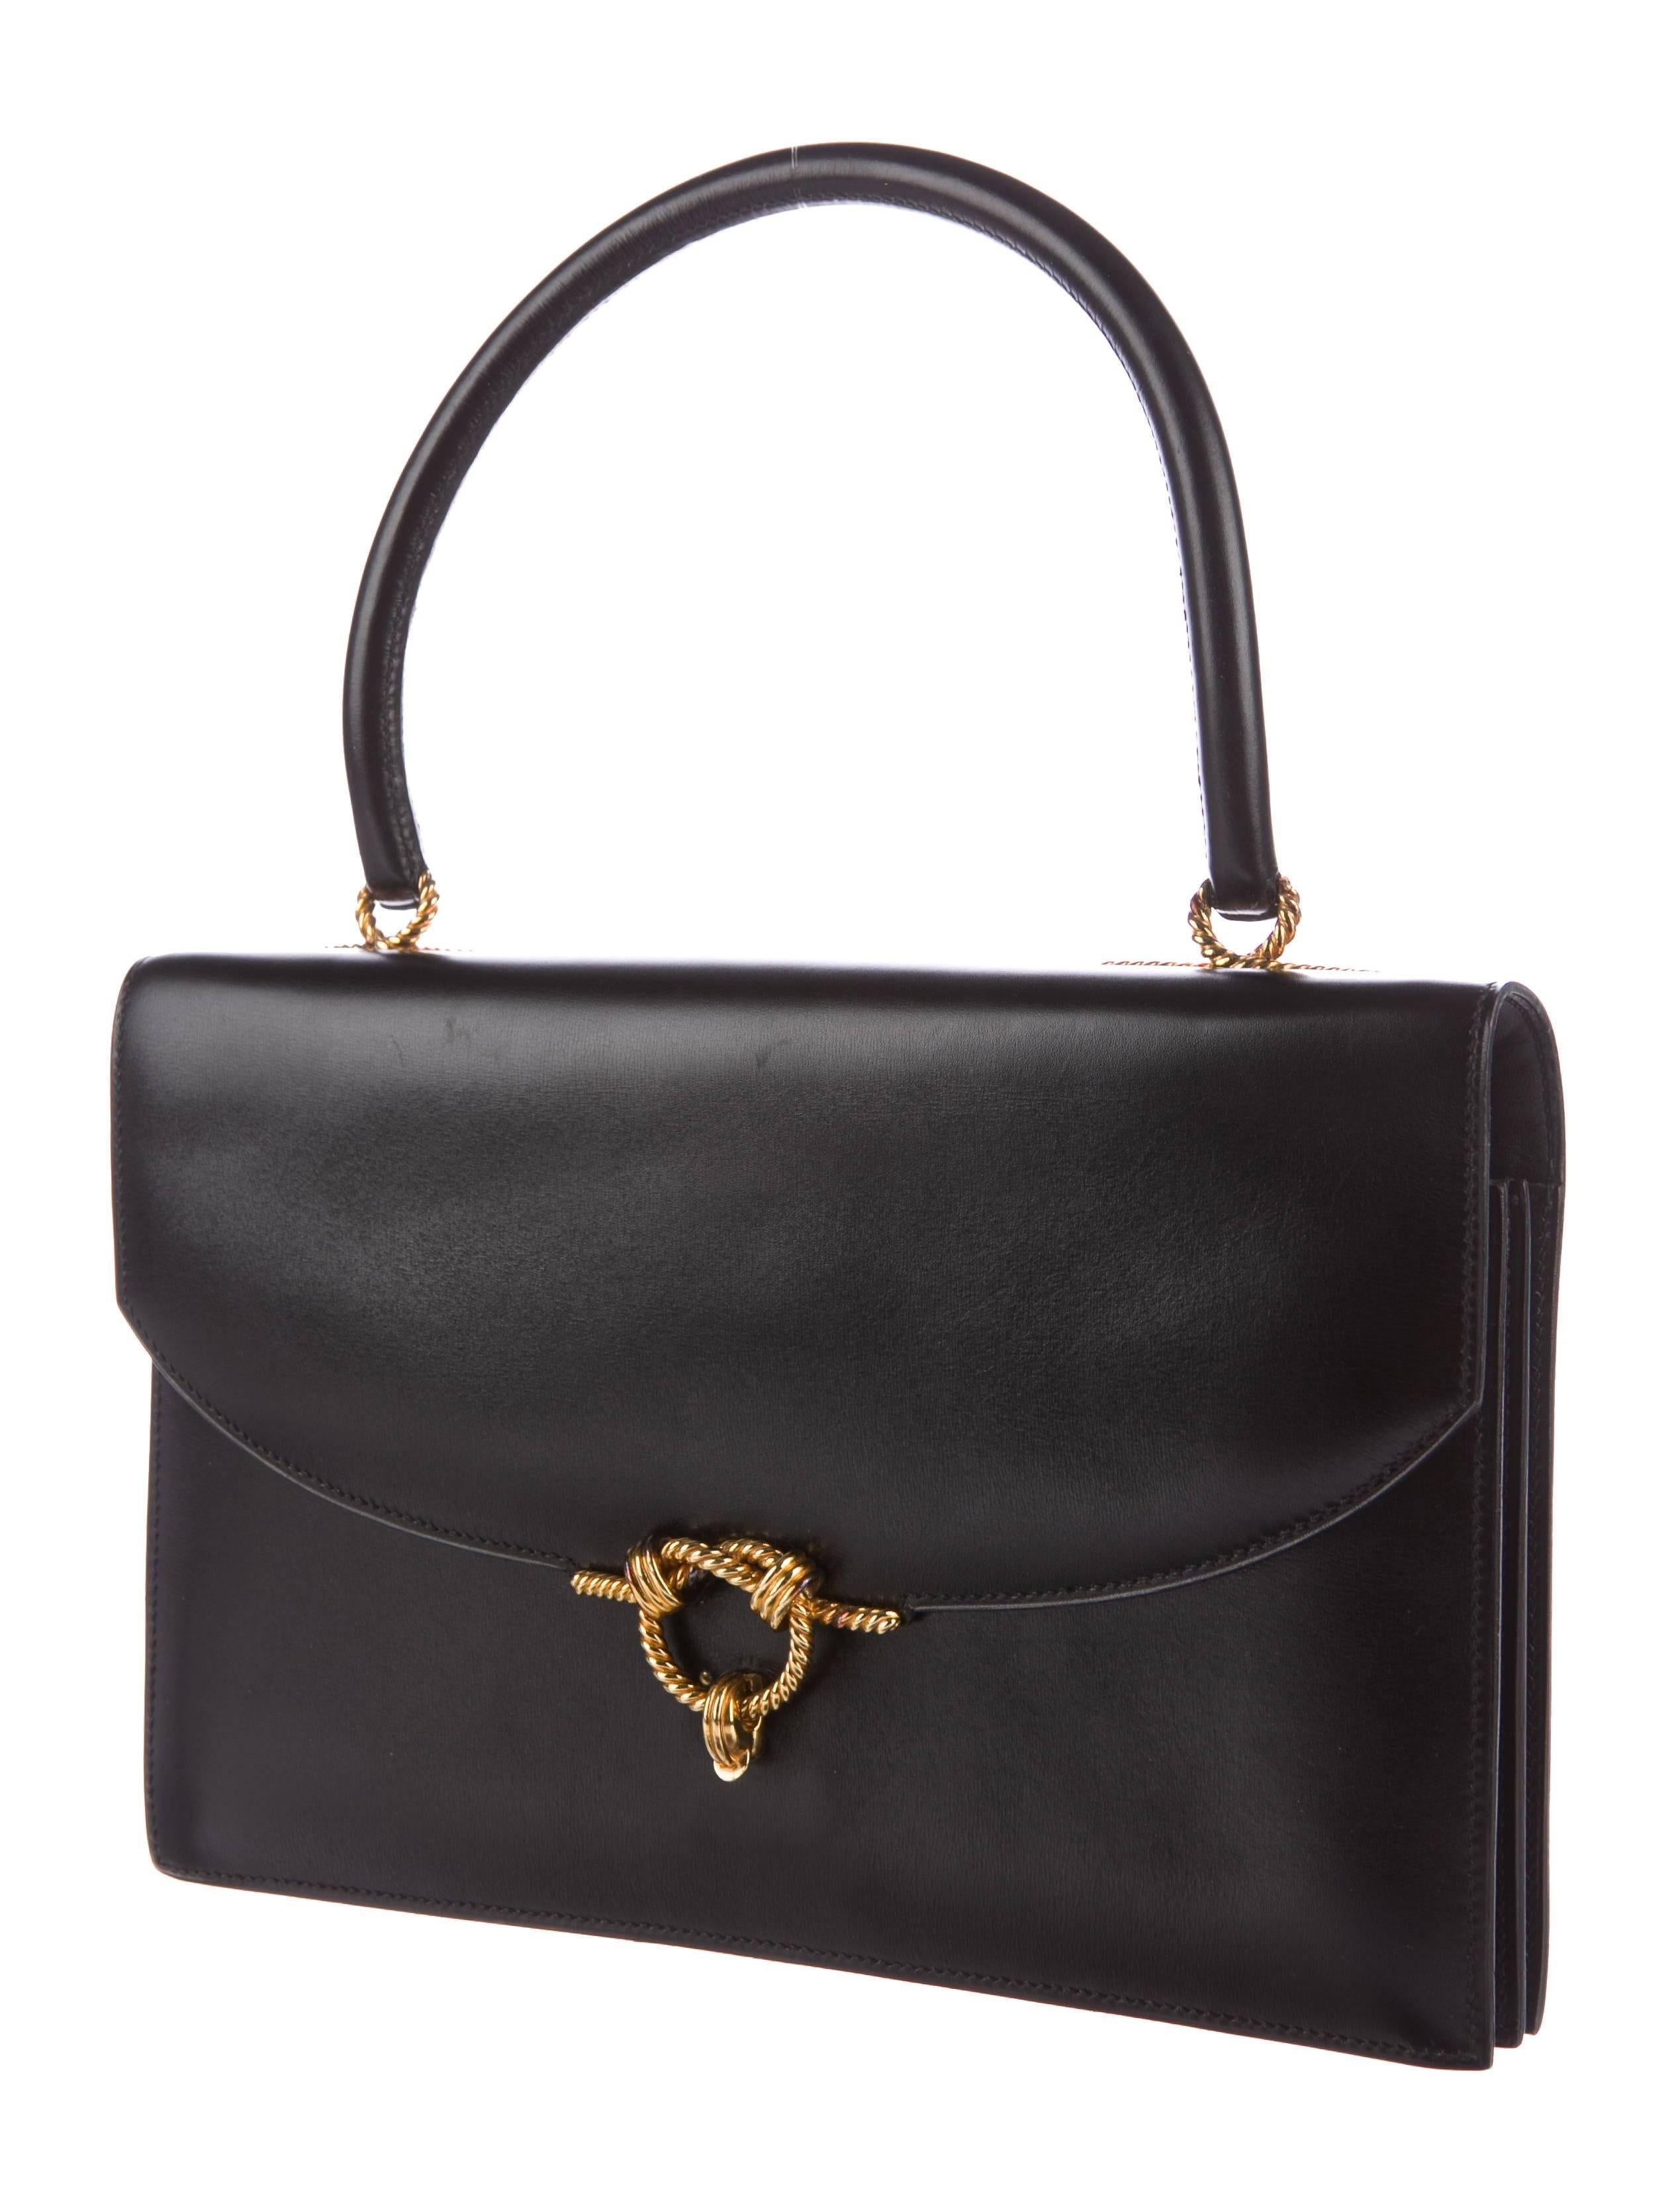 CURATOR'S NOTES

Hermes Black Leather Gold Rope Kelly Style Evening Top Handle Satchel Flap Bag

Leather
Gold tone hardware
Leather lining
Flip lock closures
Blind stamped
Made in France
Handle strap drop 5